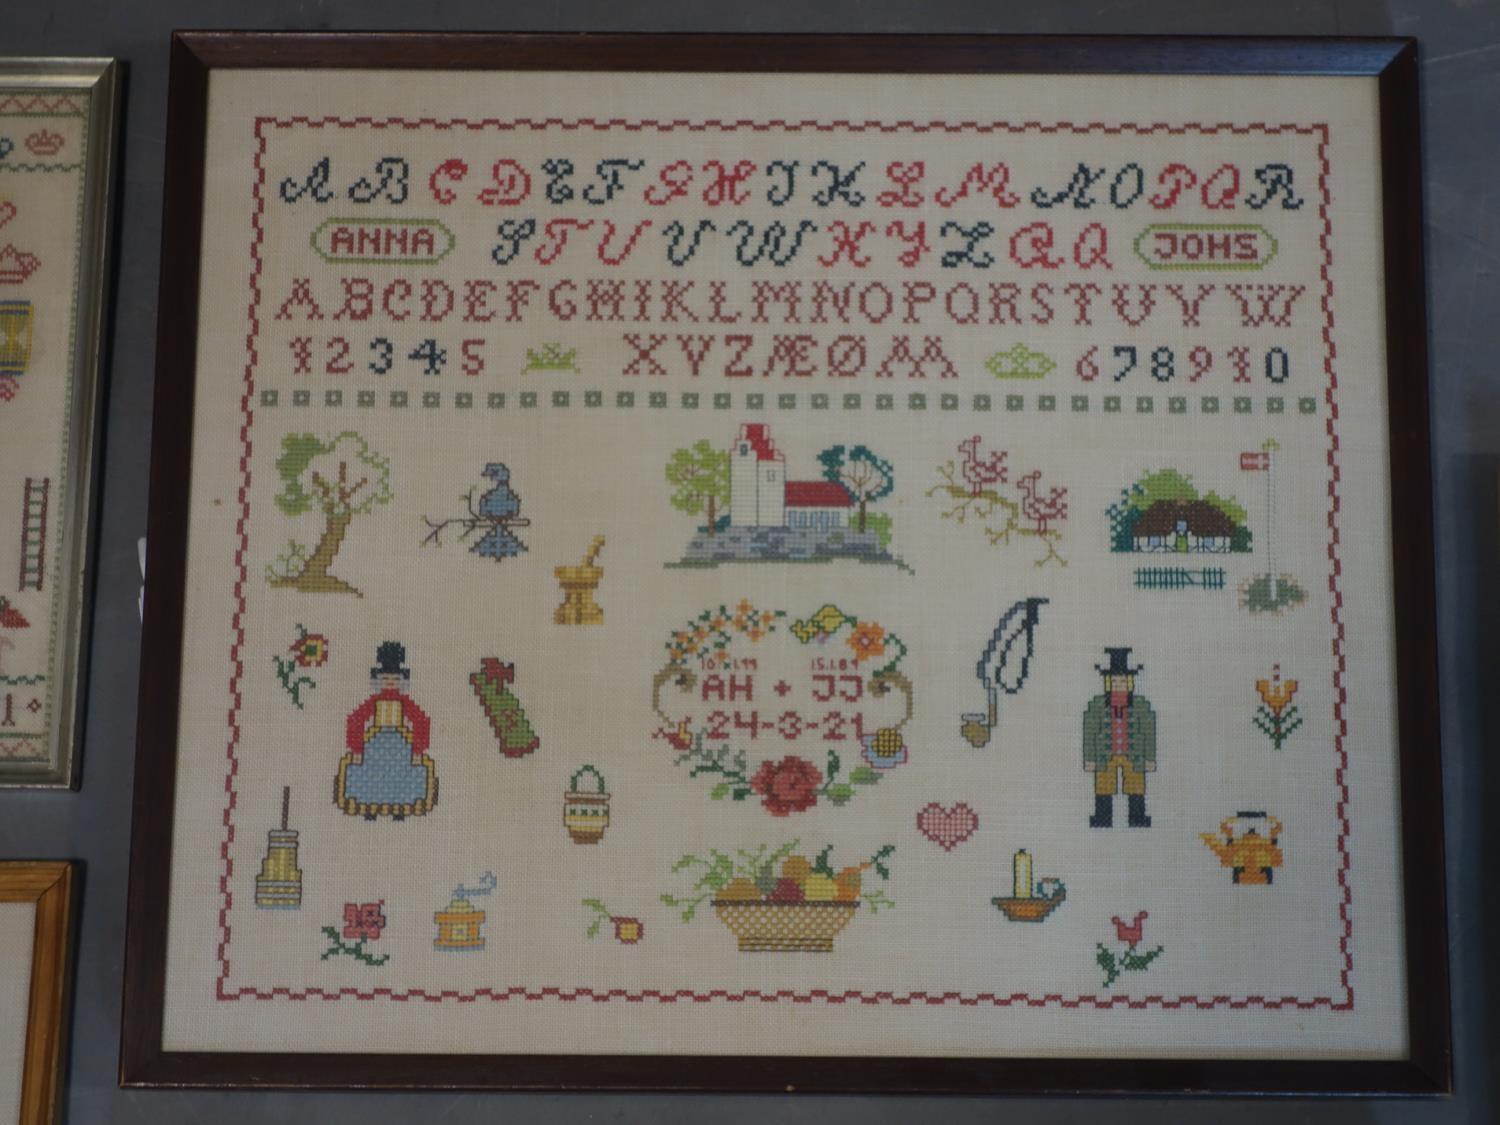 A collection of five 20th century Danish needlework samplers, with alphabets, numbers, figures, - Image 3 of 4